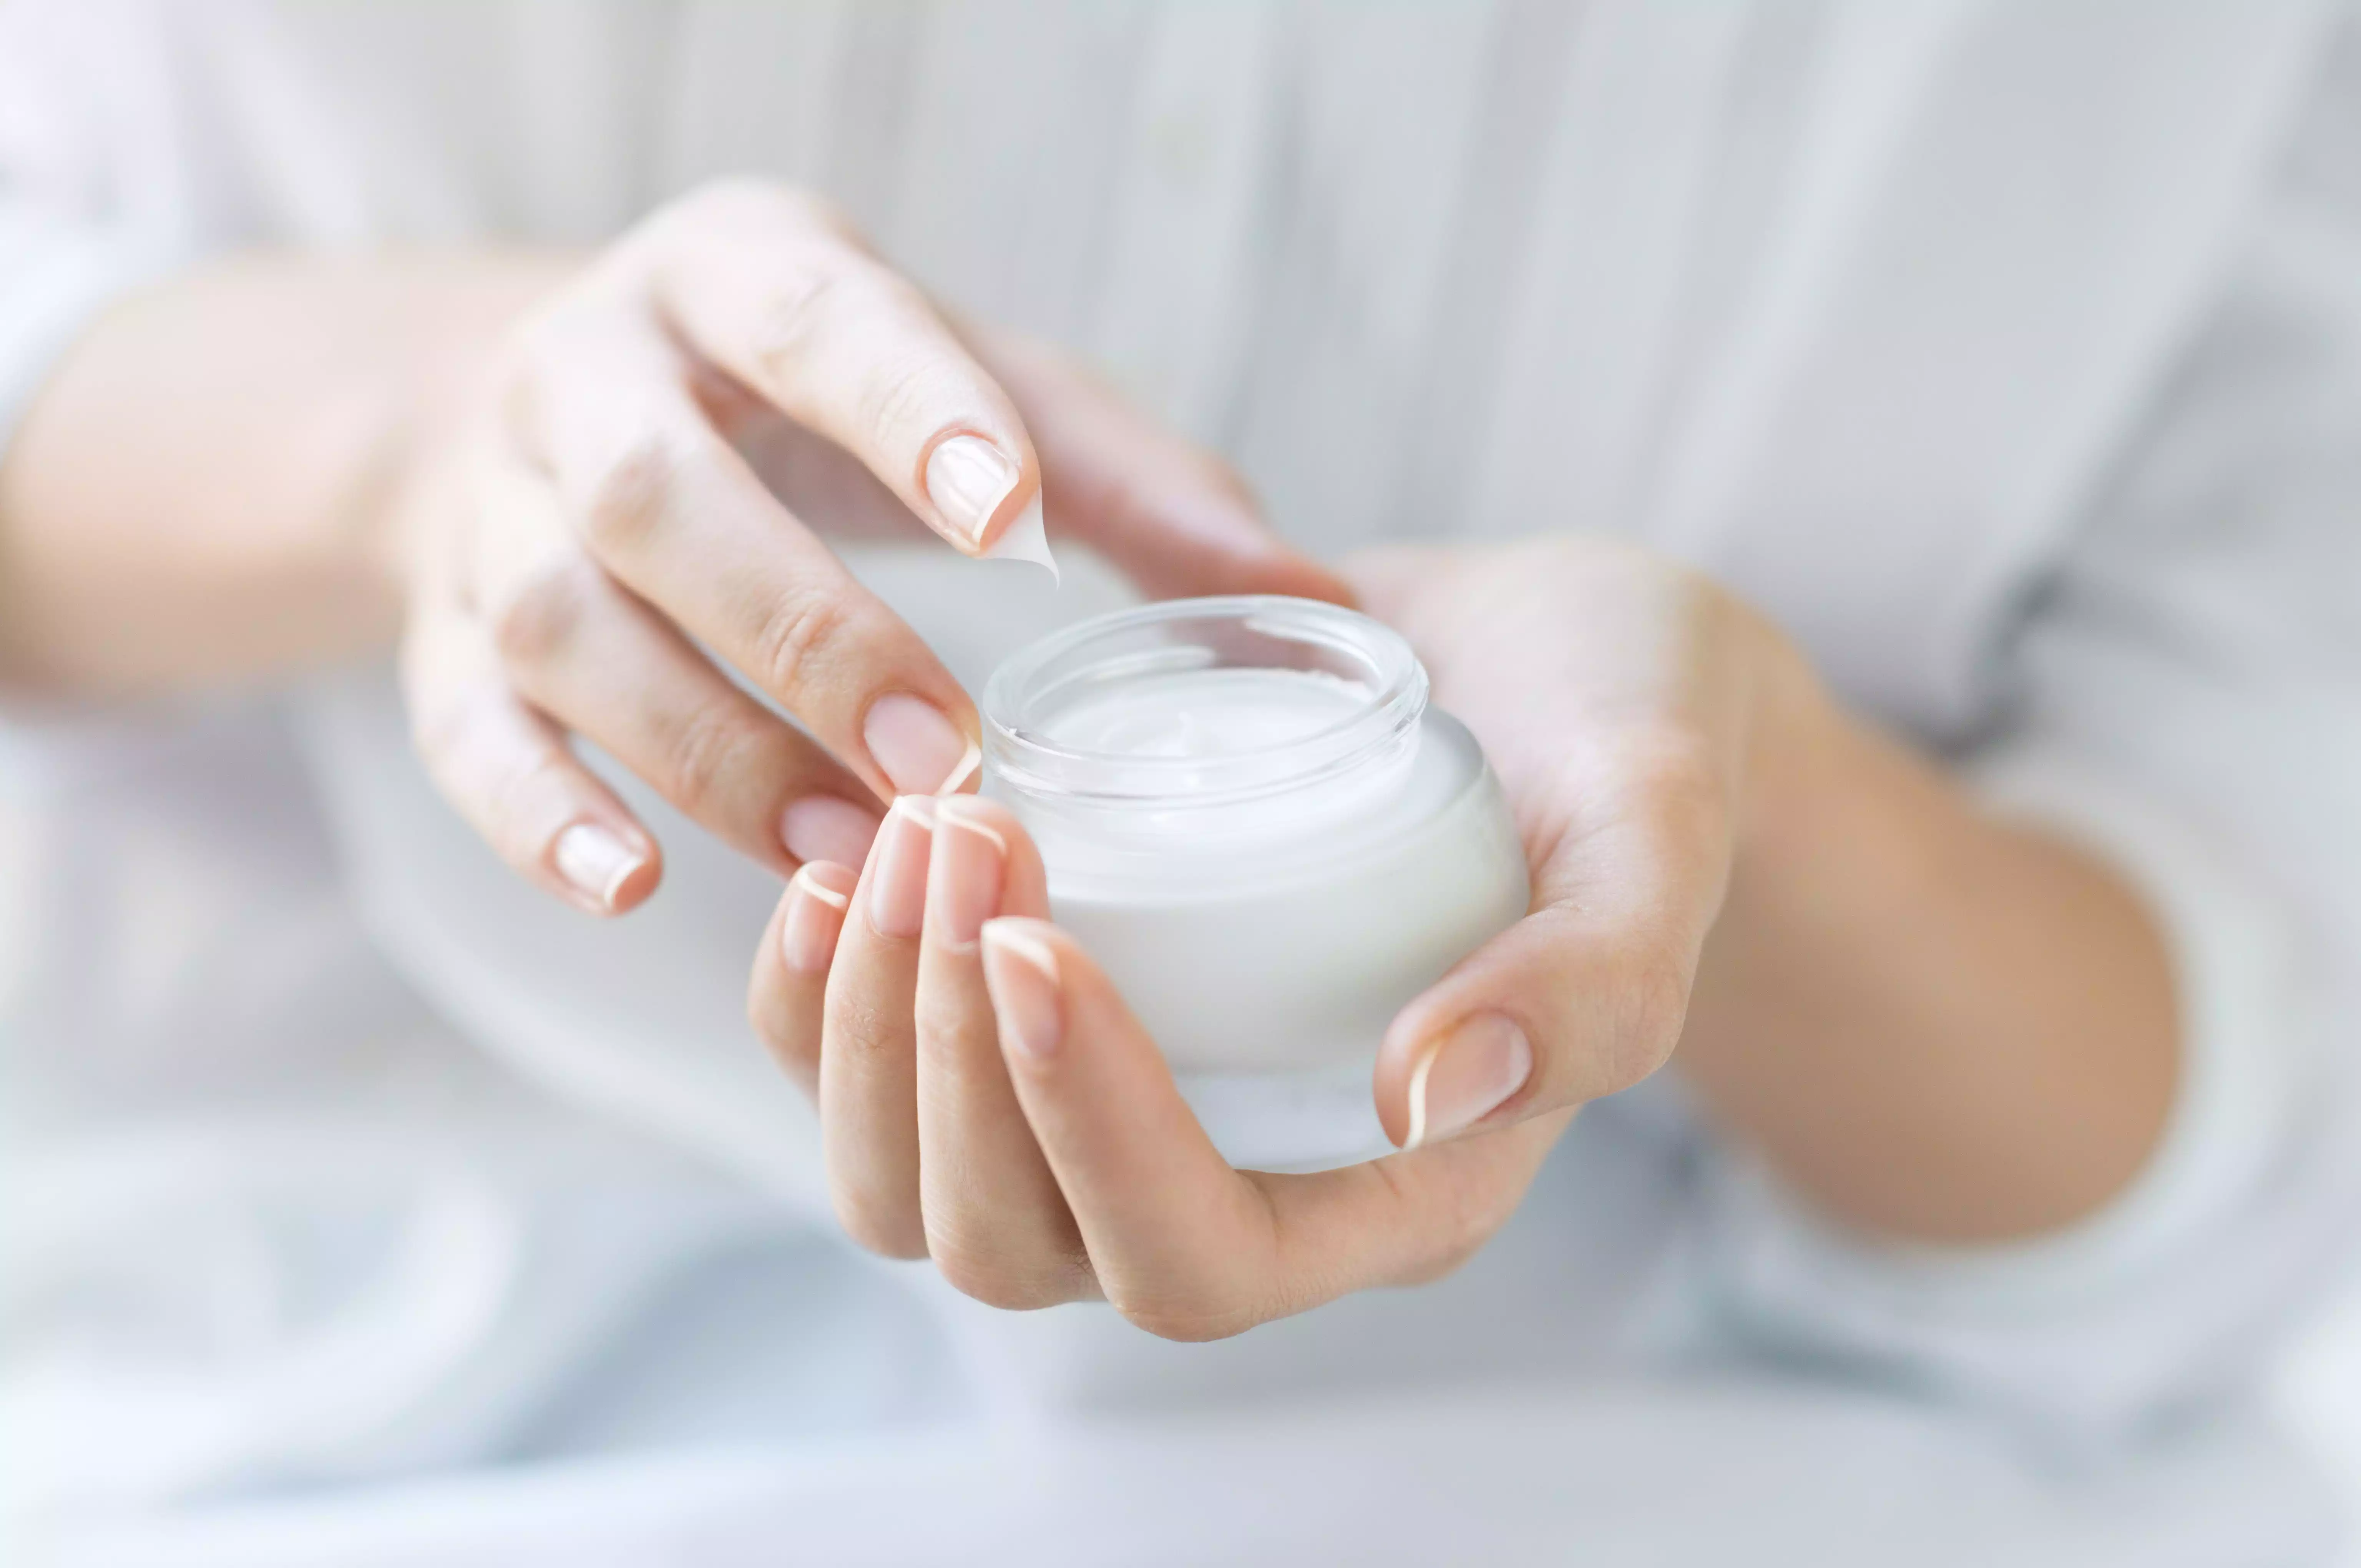 Compounded Psoriasis Creams to Reduce Pain and Itchiness | Burt's Pharmacy and Compounding Lab